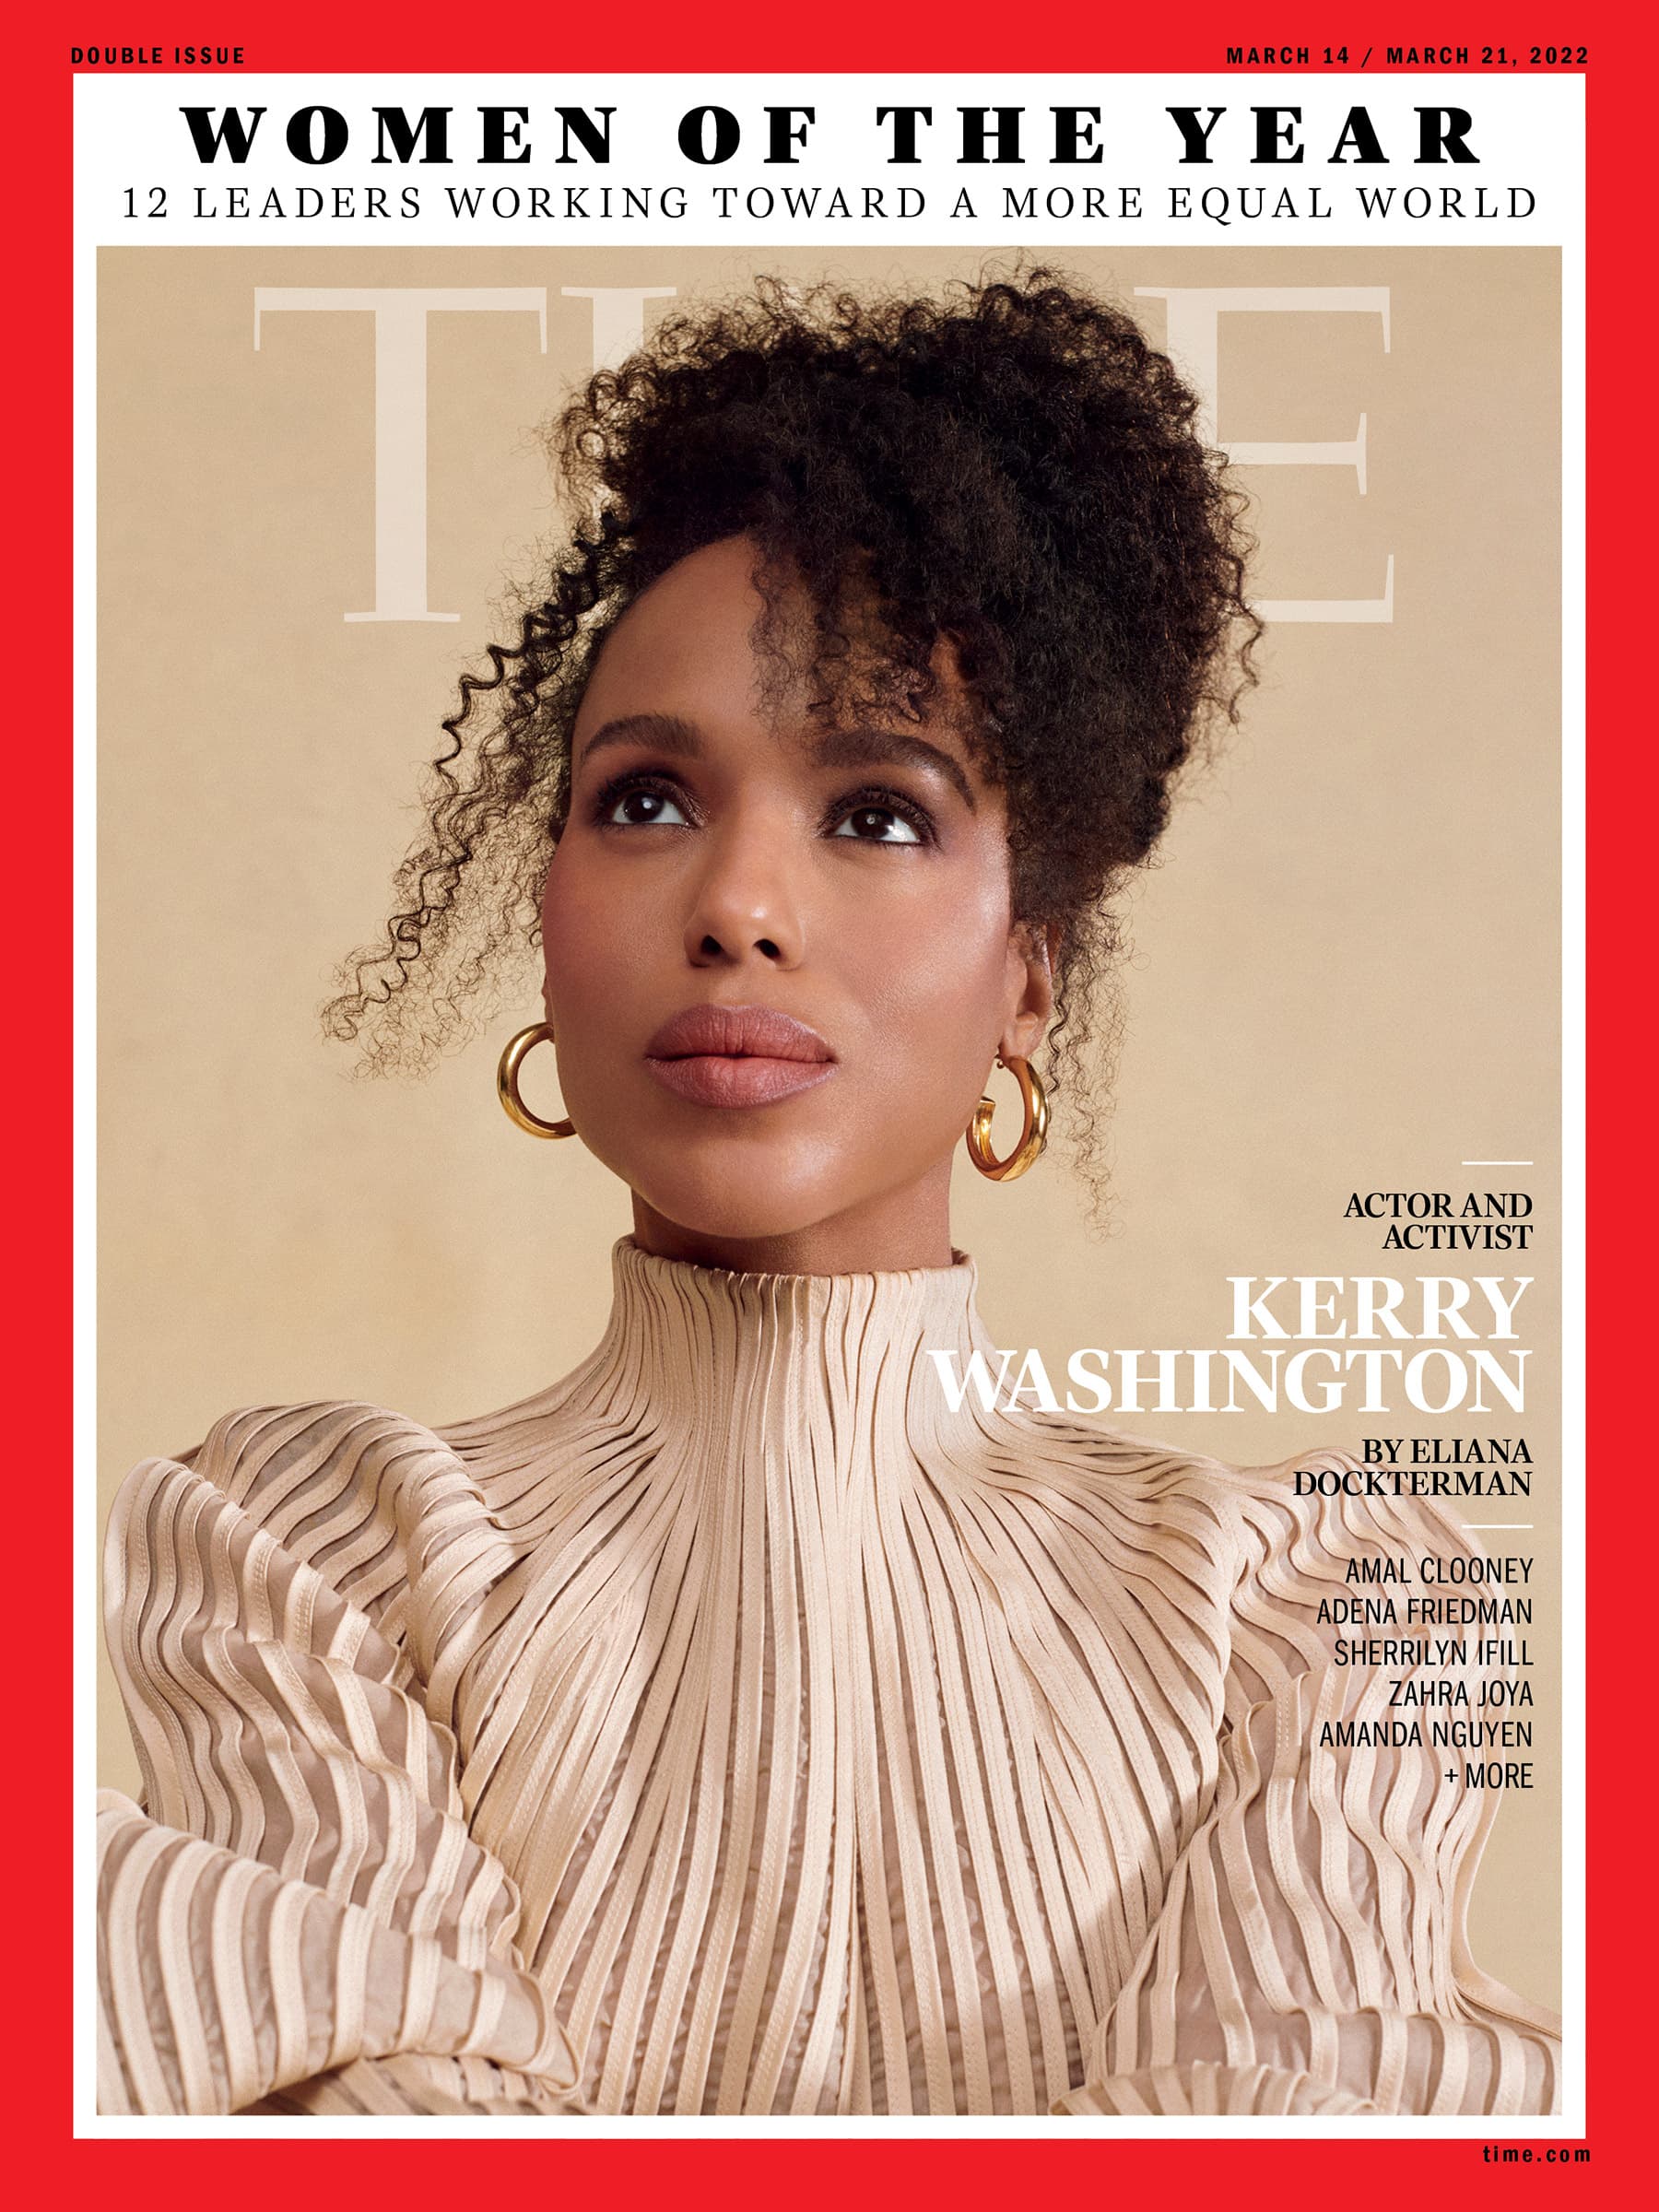 Kerry Washington Featured on TIME’s Women of the Year